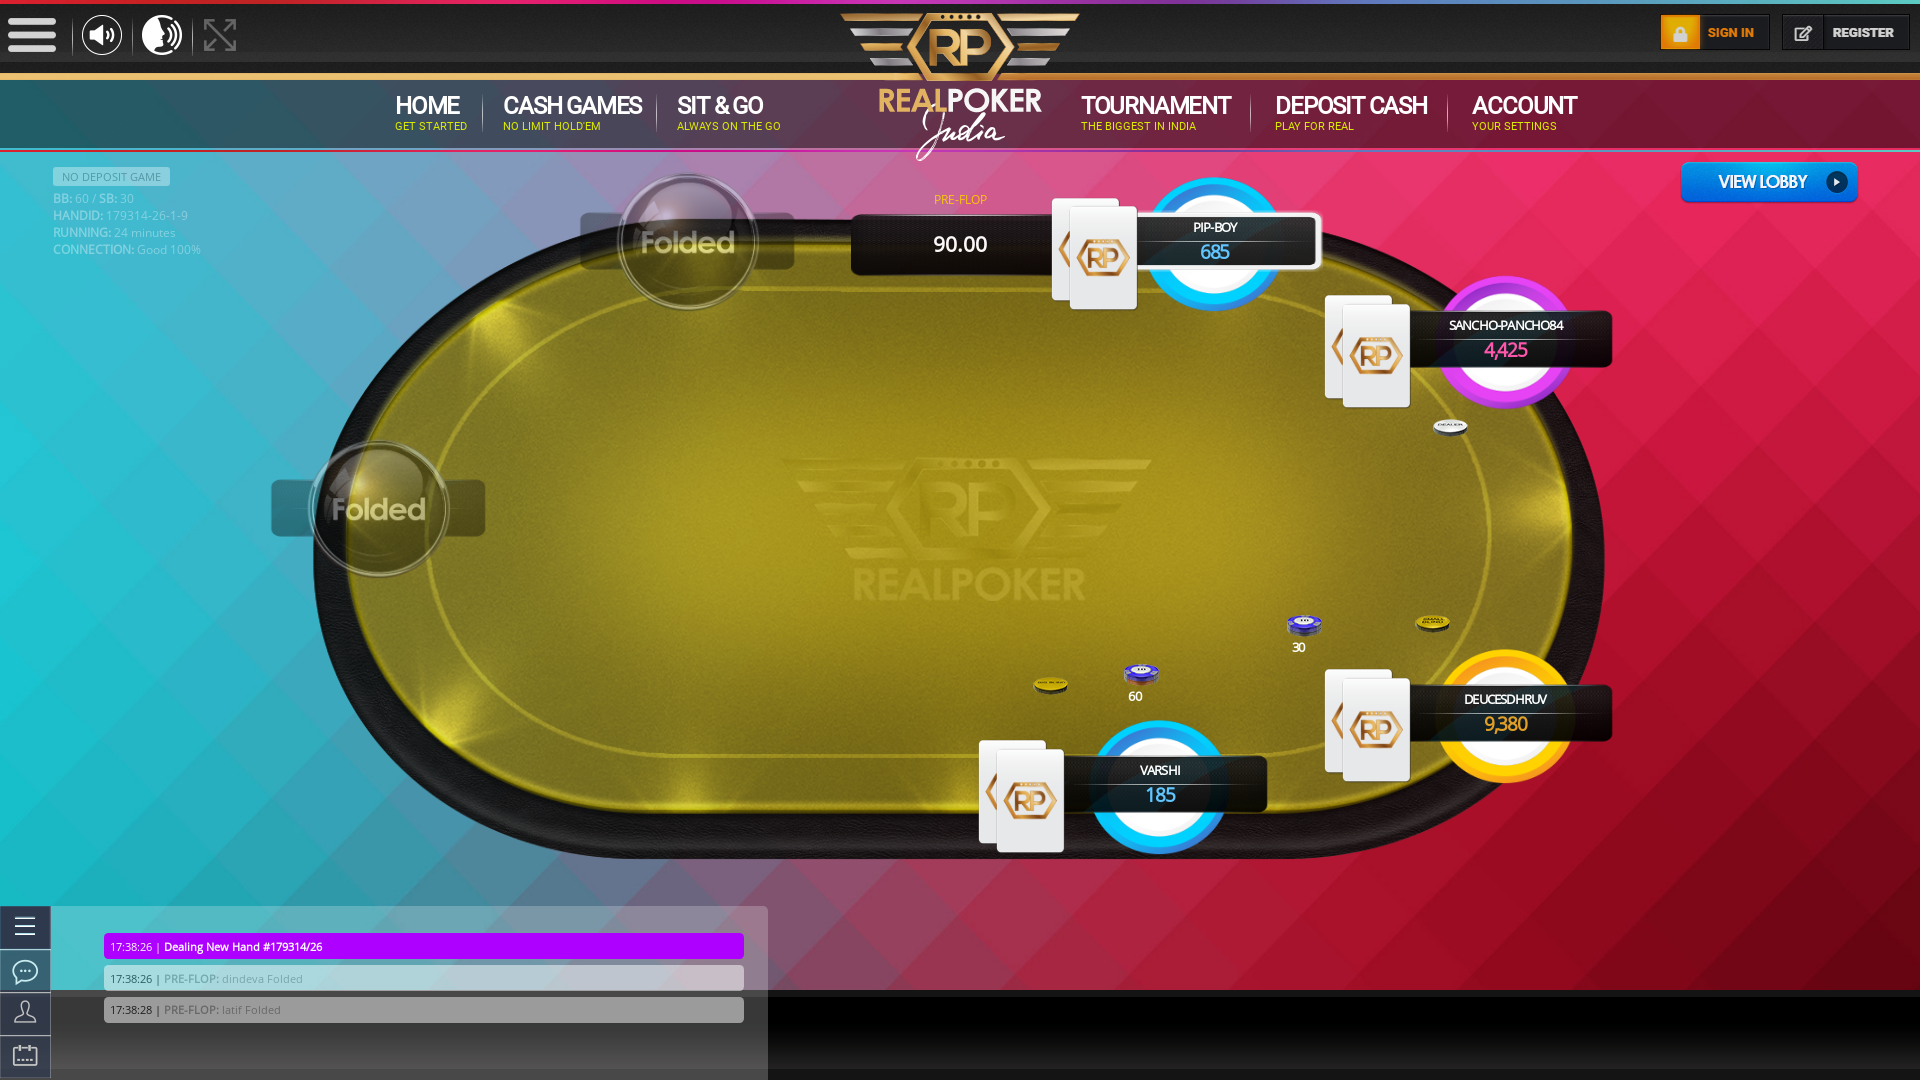 Real Indian poker on a 10 player table in the 24th minute of the game